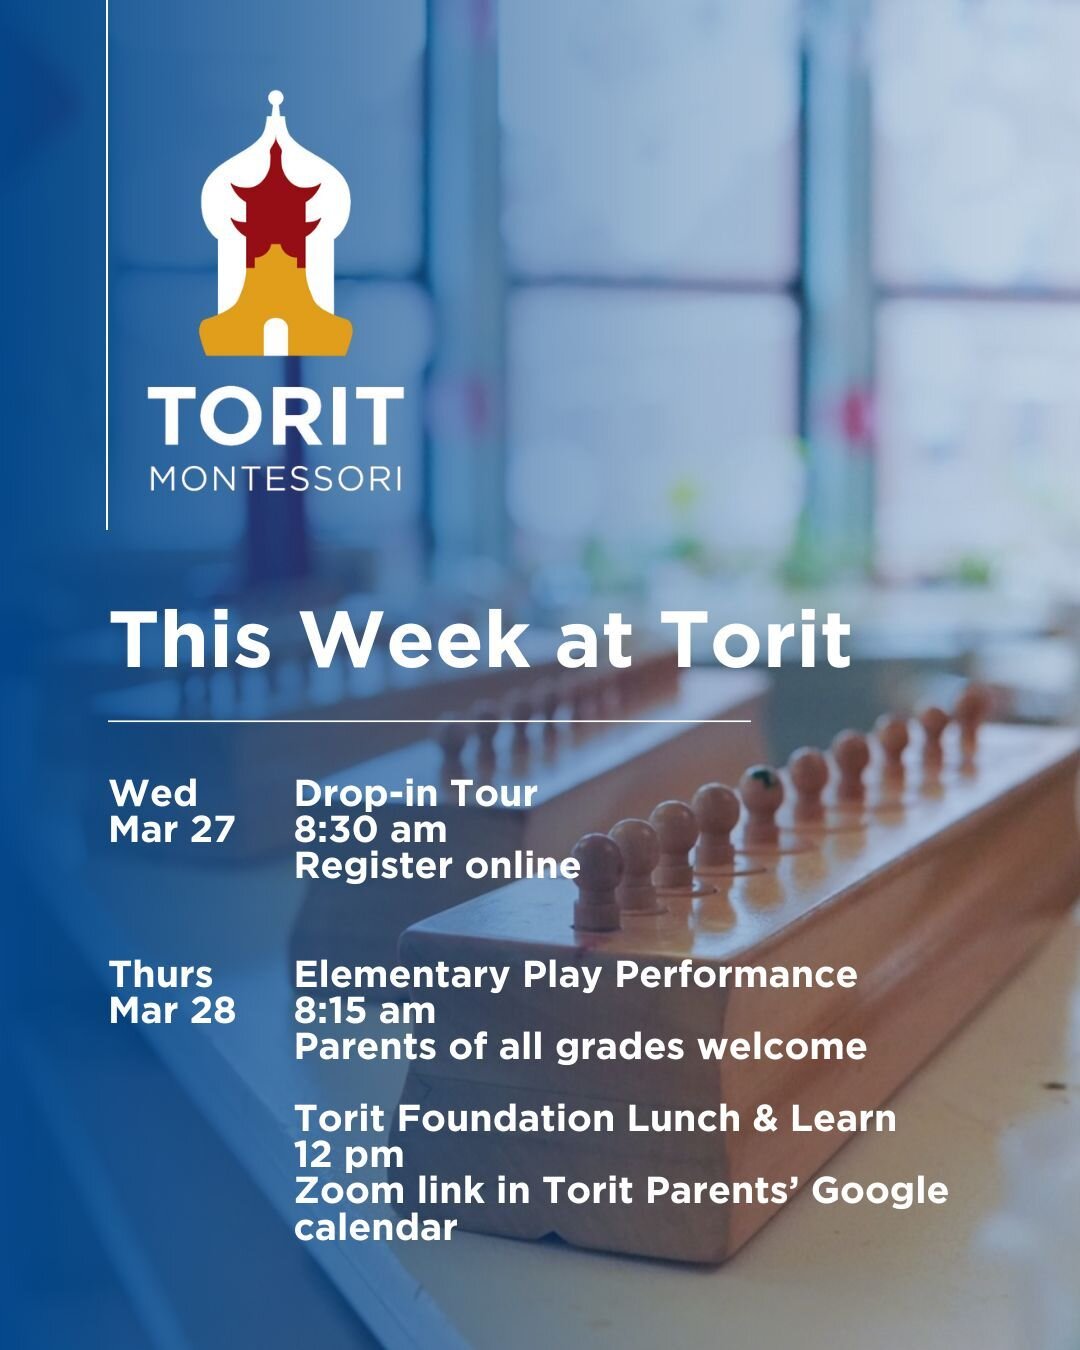 🌟 This Week at Torit 🌟

🗓️ Wednesday, March 27, 8:30 am: Prospective parents are invited to join us for a drop-in tour. Experience the Torit difference firsthand. Register online.

🎭 Thursday, March 28, 8:15 am: Don't miss the Elementary students